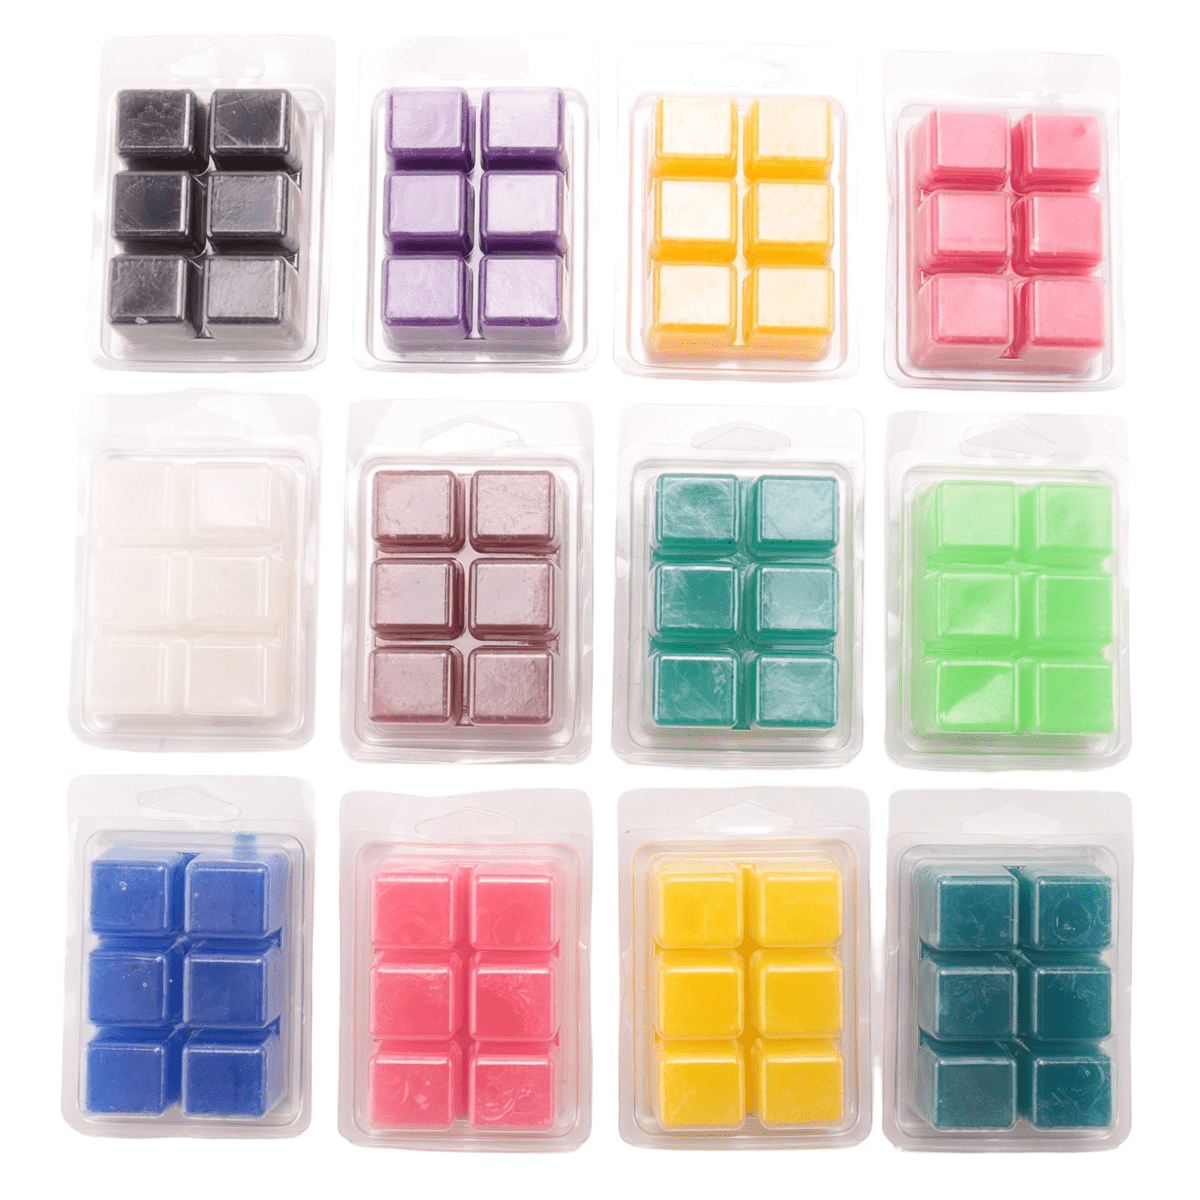 Winyuyby 12 Pack Scented Wax Melts Wax Square, Scented Wax Melts, Soy Wax  Melts for Warmers, Wax Square Gift Set, Baby Powder Wax 